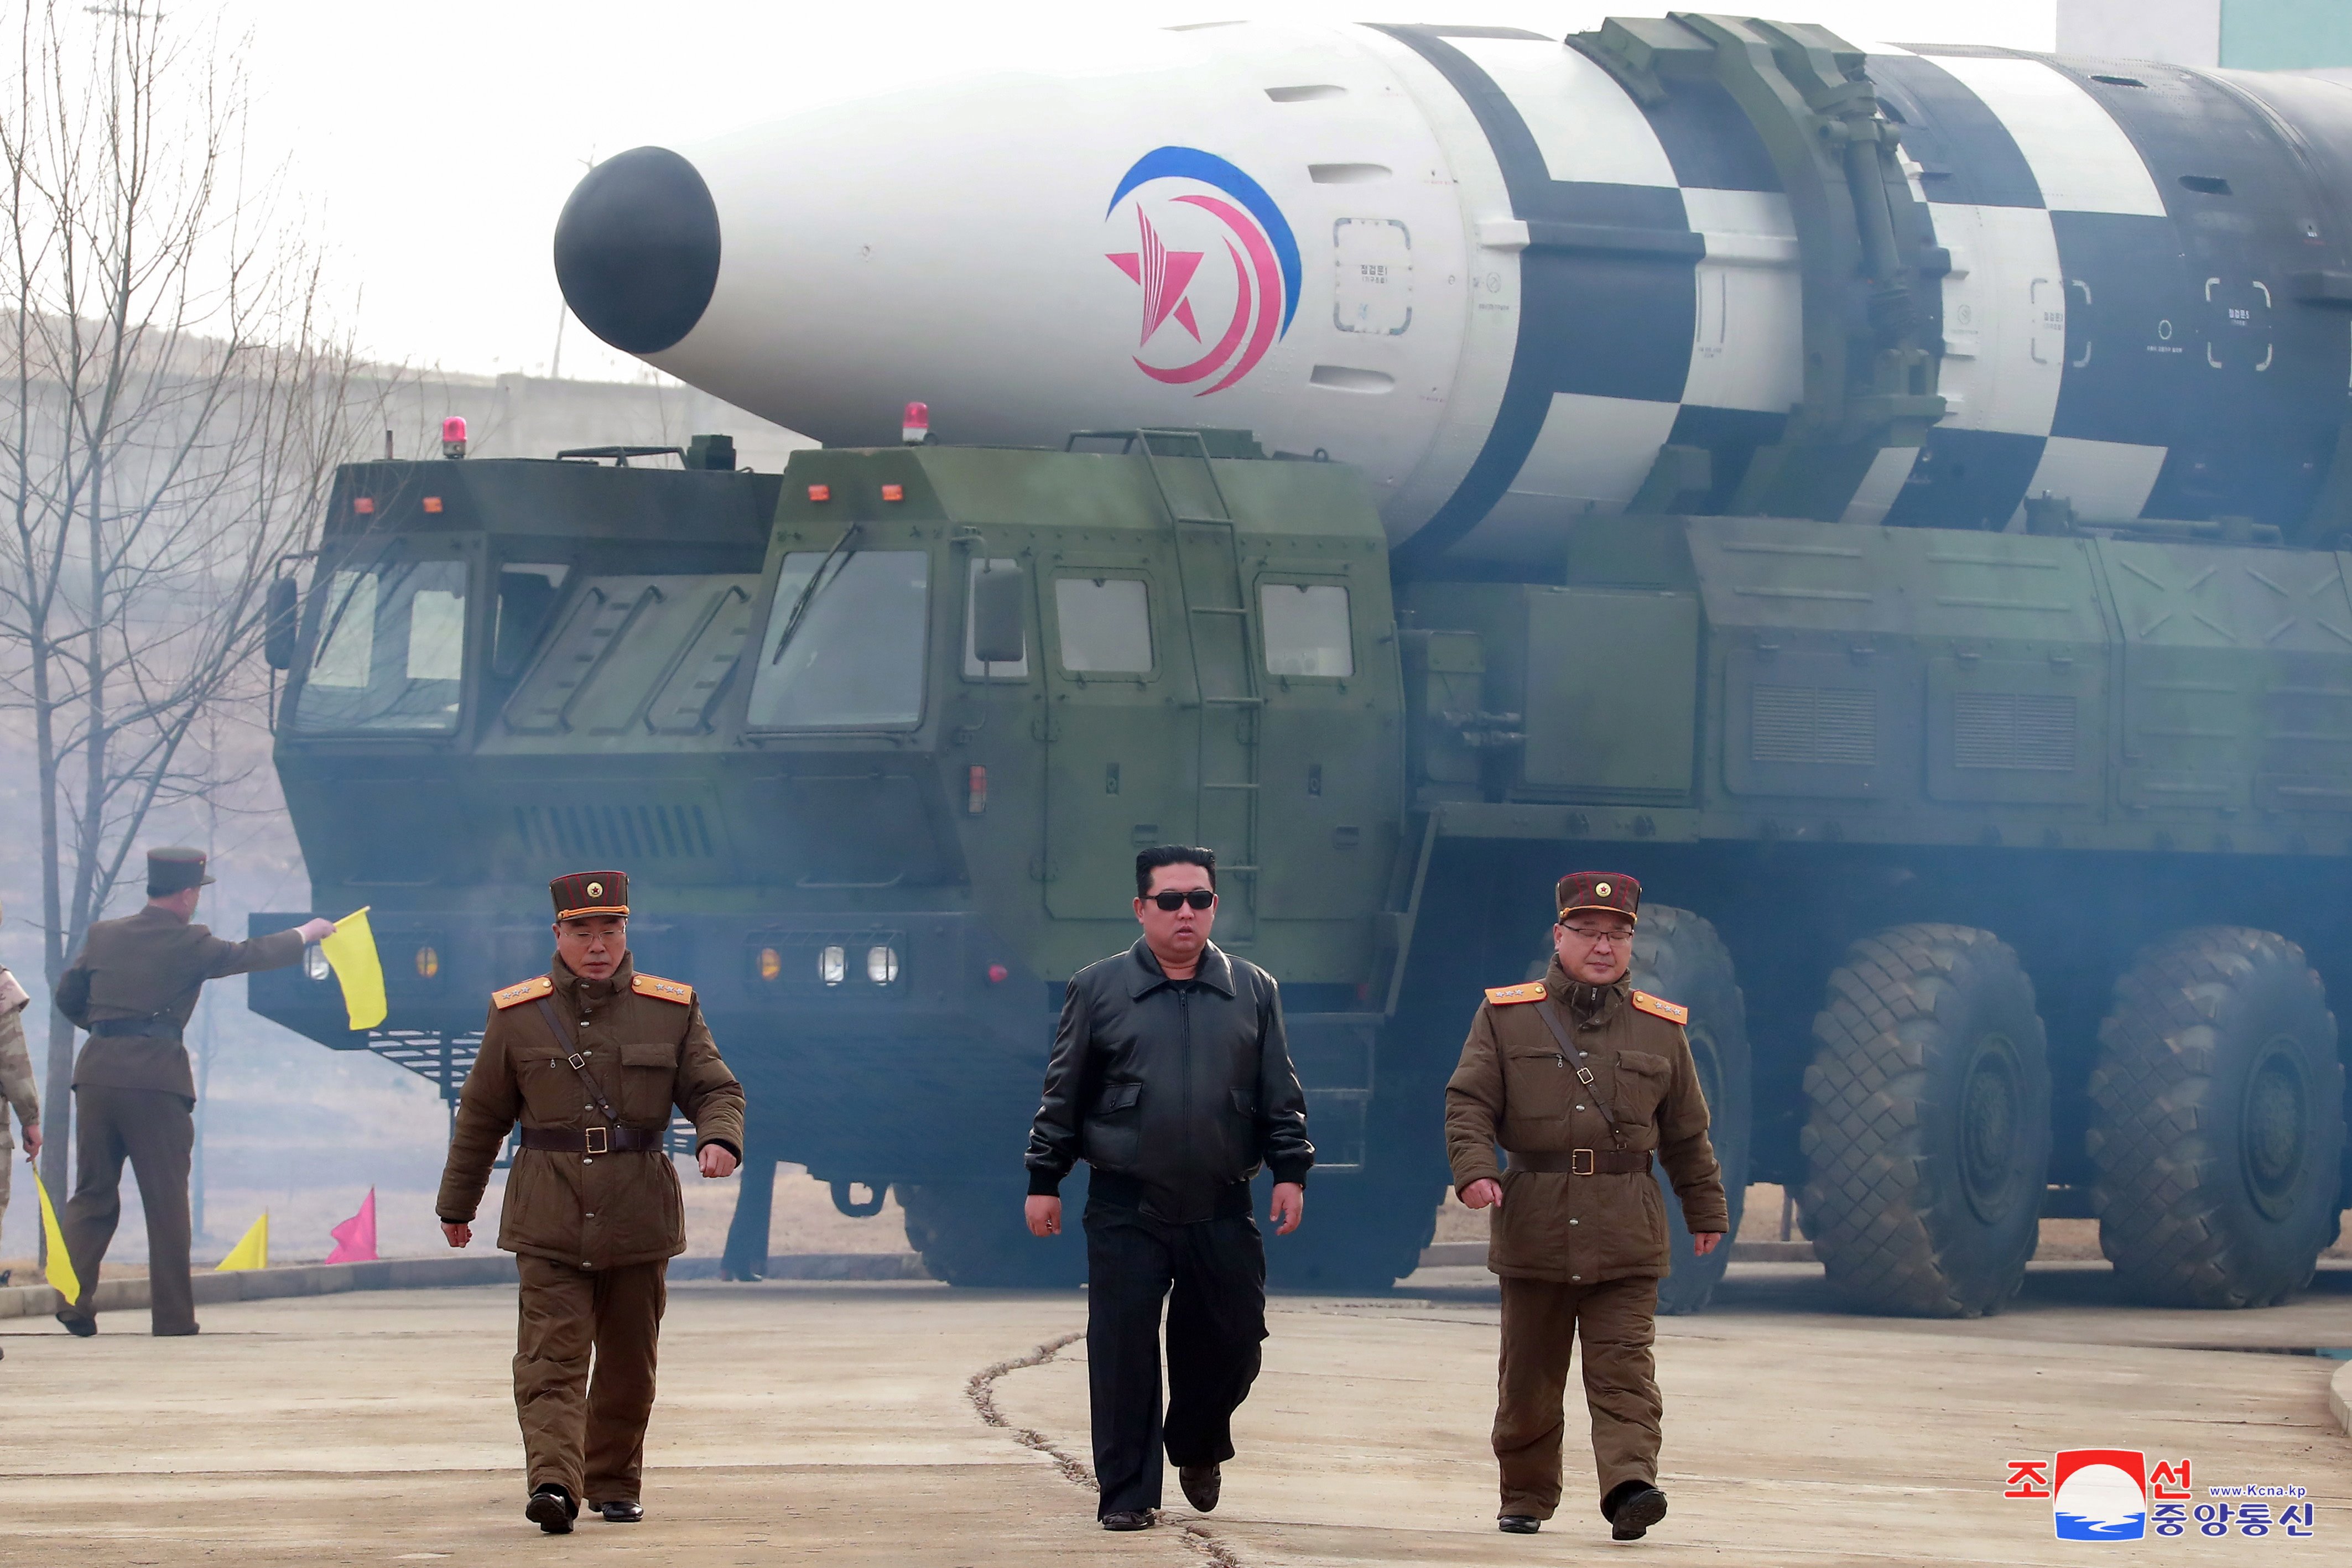 Photo released by the official North Korean Central News Agency (KCNA) shows Kim Jong Un (C), Jang Chang-ha (L rear), Chief of the Academy of National Defense, and Kim Jong-sik (R), the Deputy Director of the Munitions Industry Department, during the test-launch of a new type of inter-continental ballistic missile Hwasongpho-17 of the DPRK strategic forces that was conducted on 24 March 2022